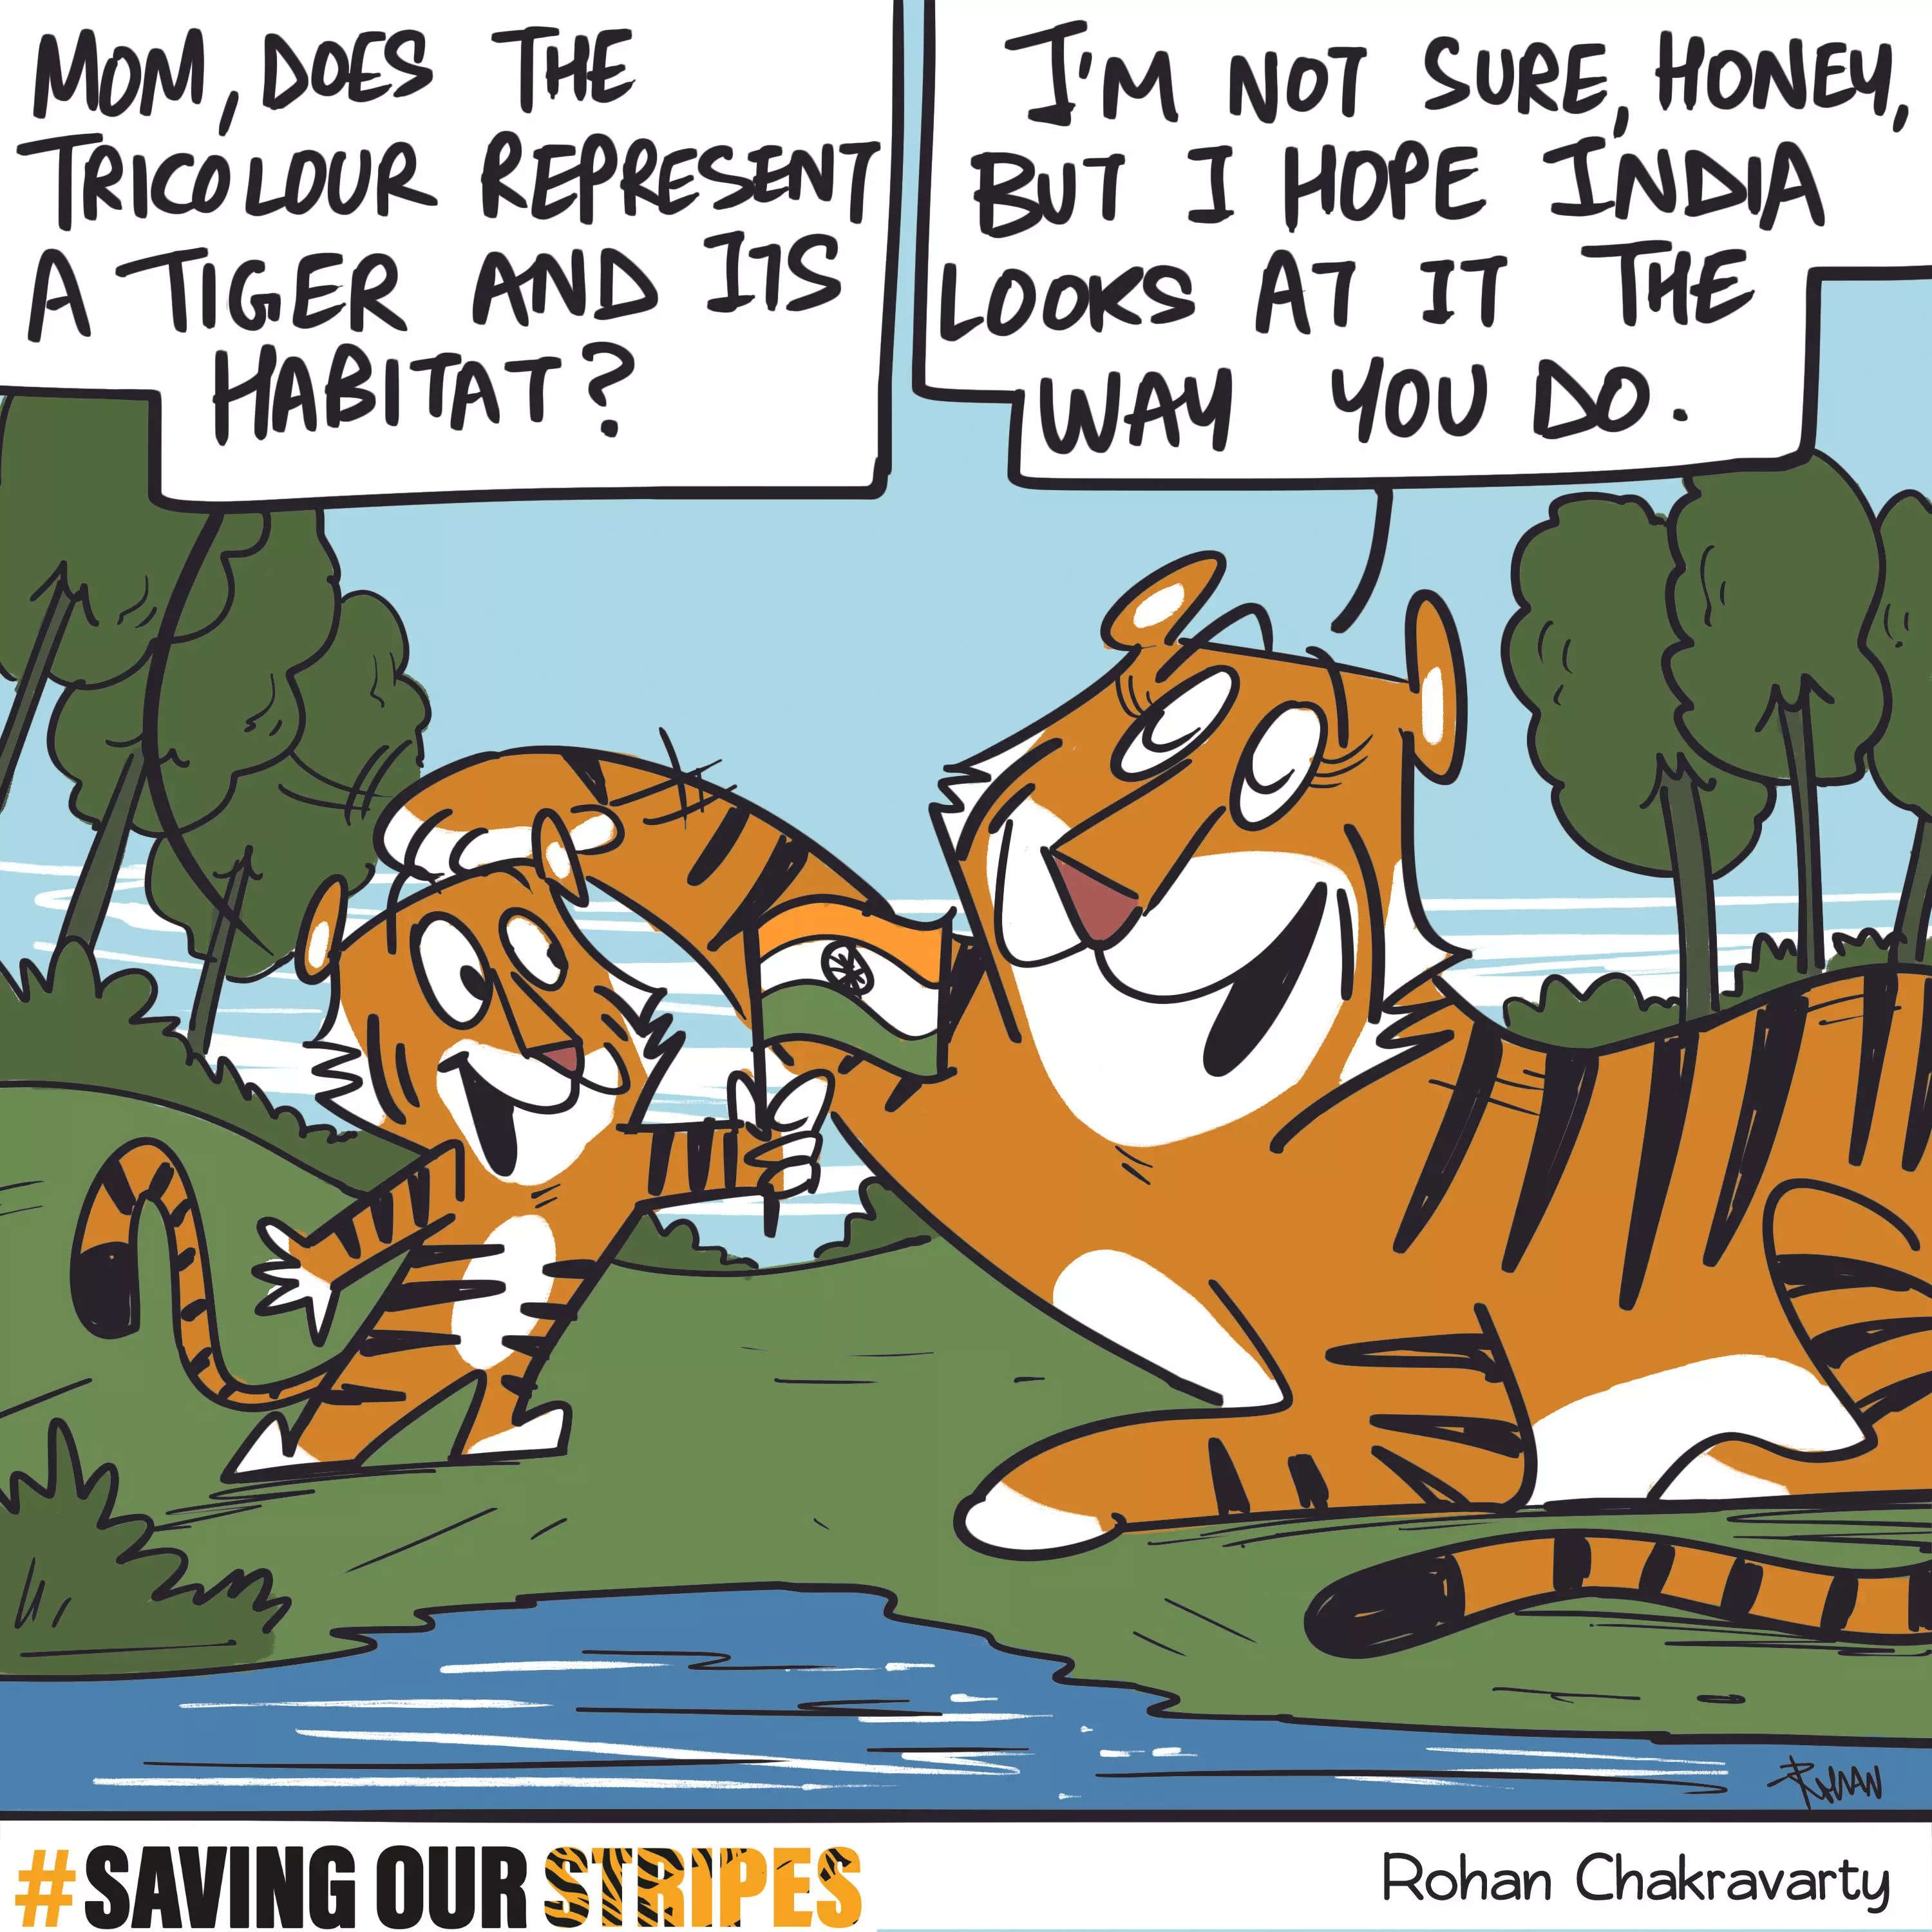 When a cub asks a question, you know it's time for us to reflect! Let's hope India looks at the tricolor as a reminder to protect tigers and their habitats.